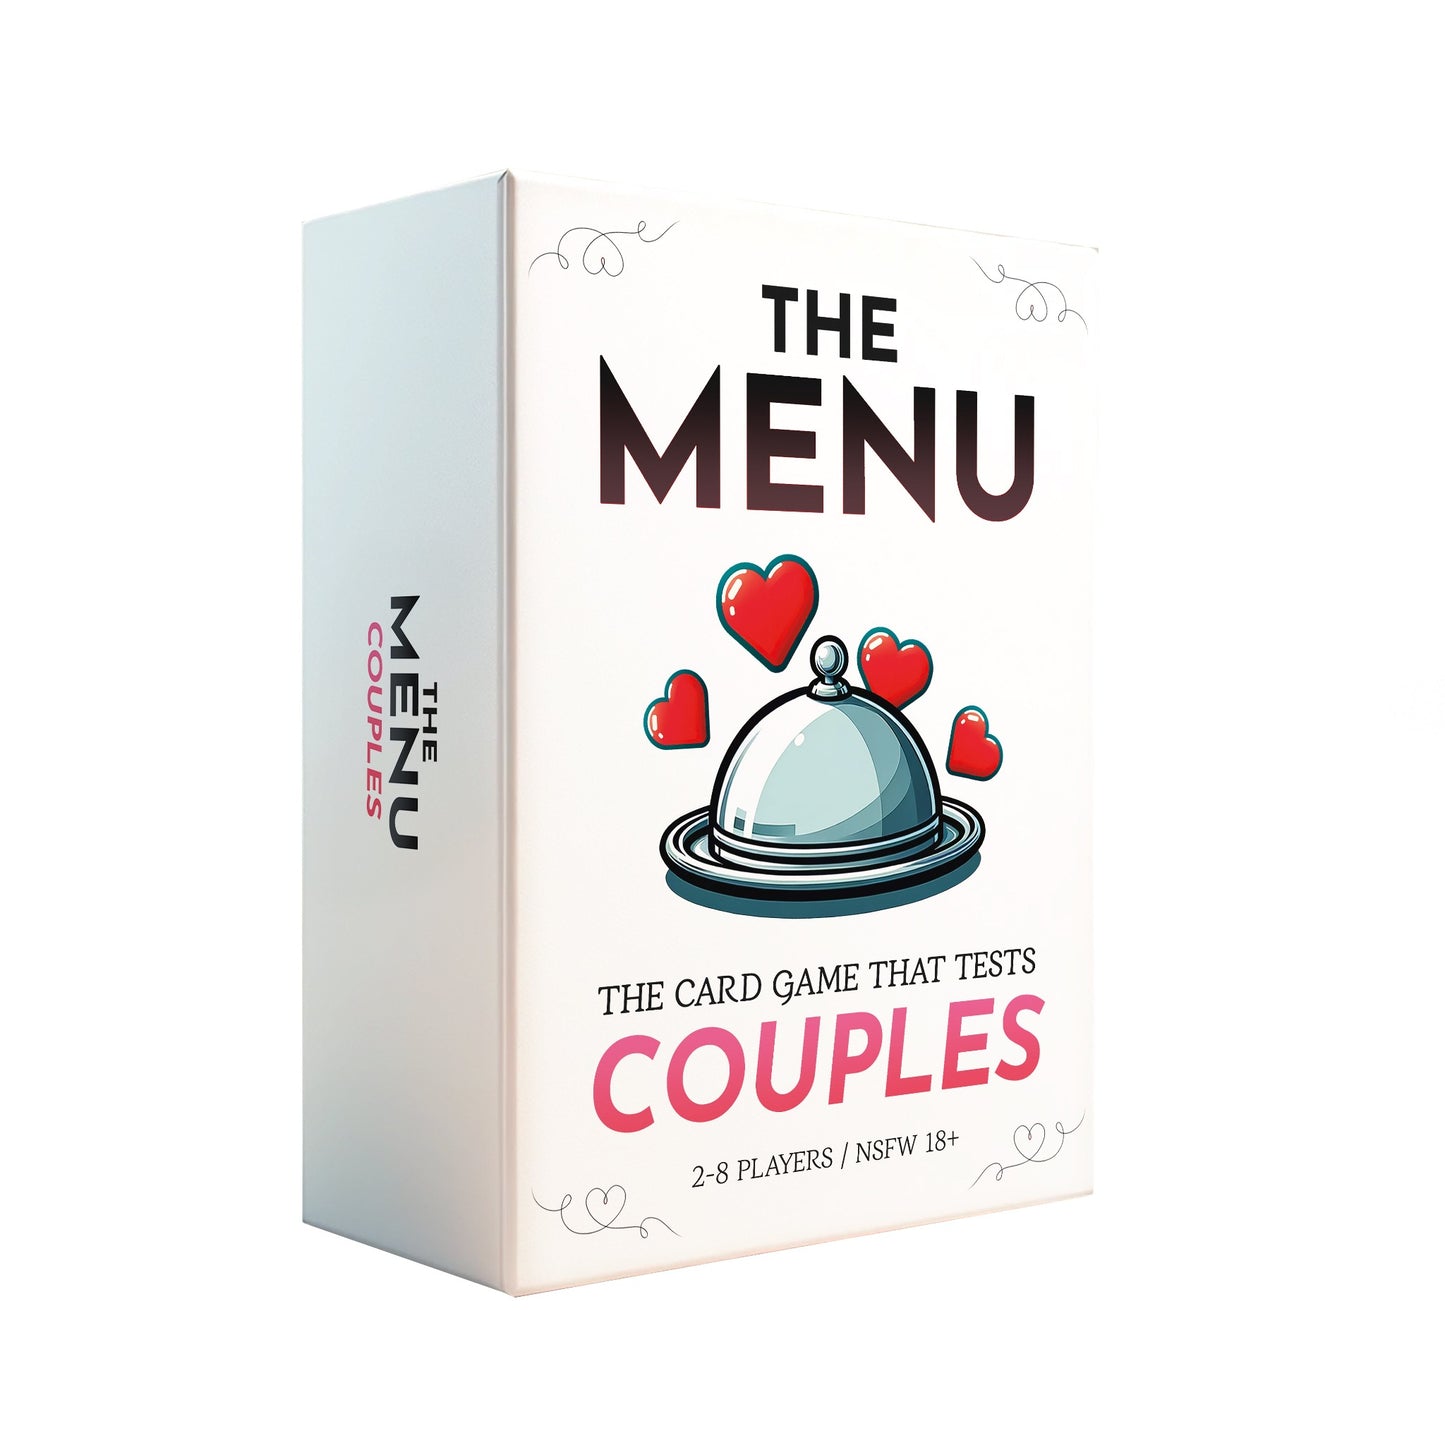 The Friendship and Relationship Test Bundle - The Menu Card Game